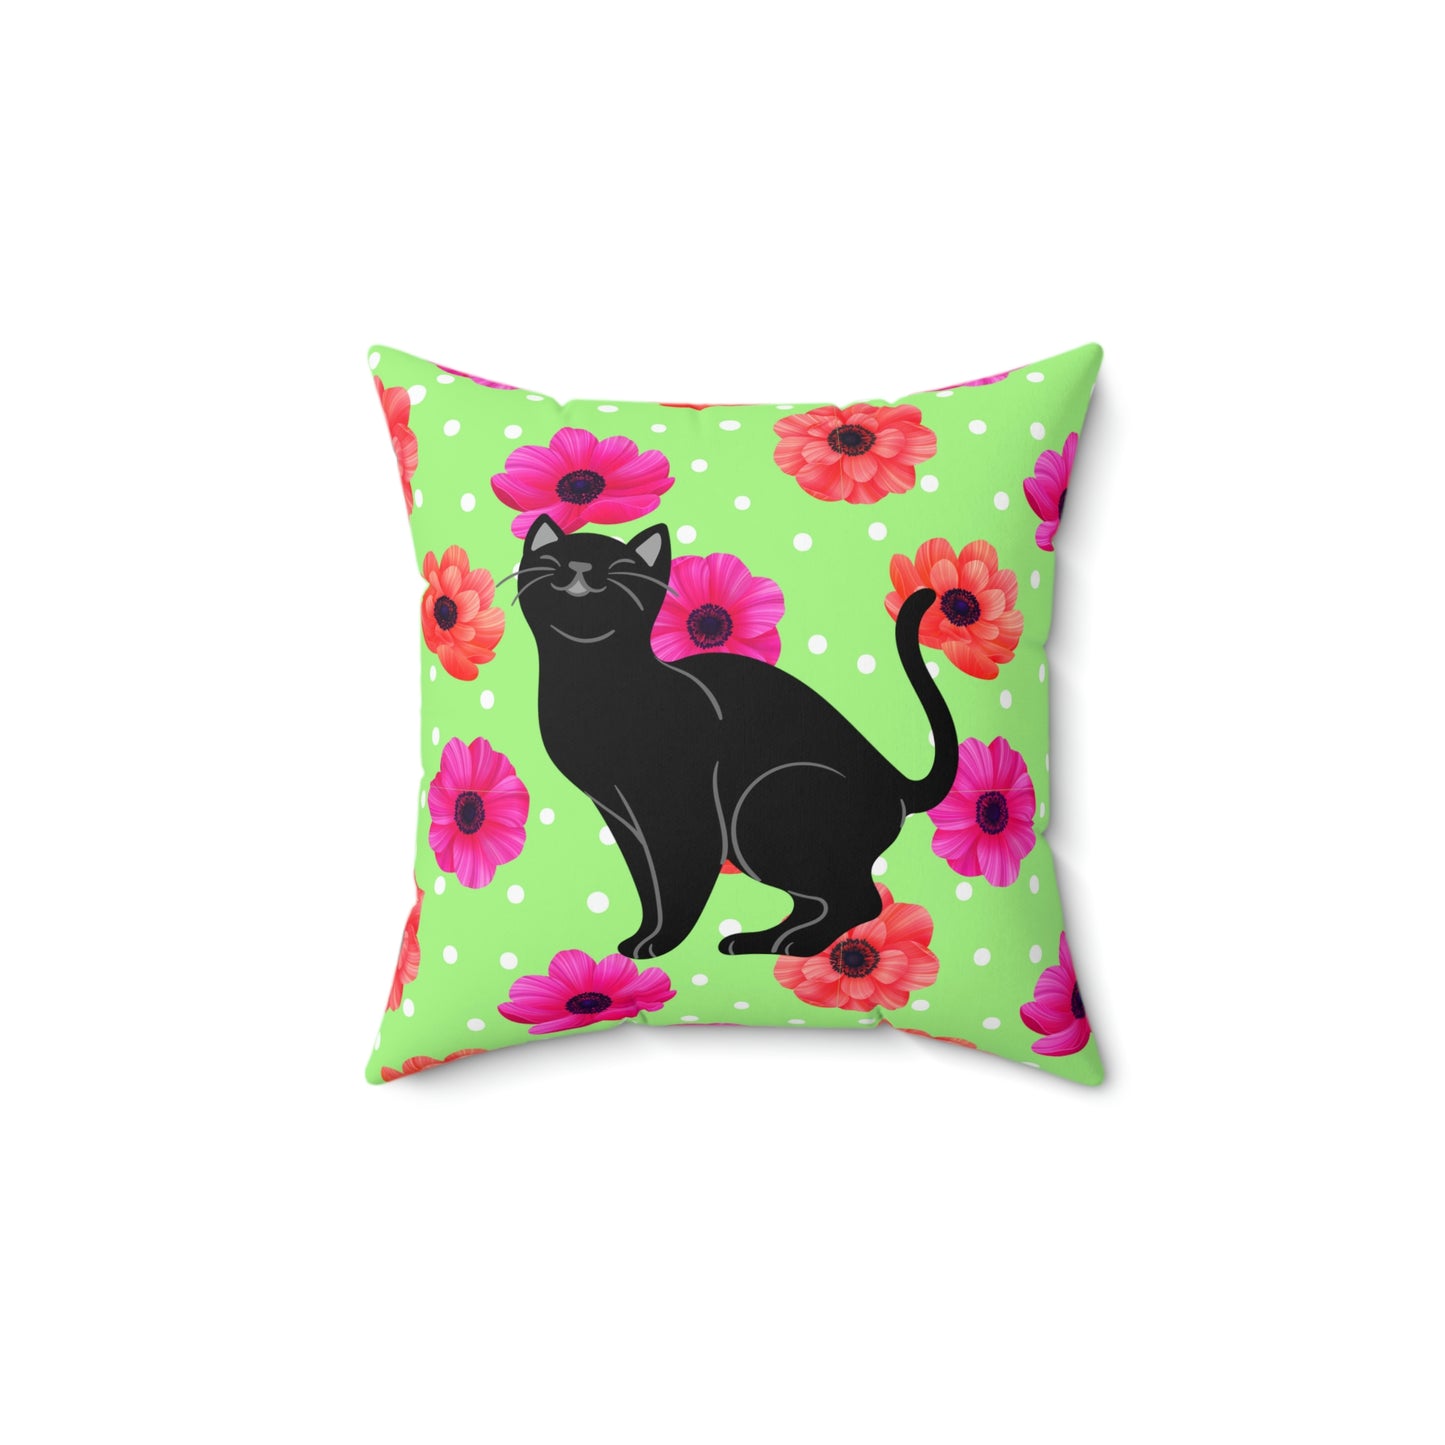 Floral Design with Black Cat Spun Polyester Square Indoor Pillow